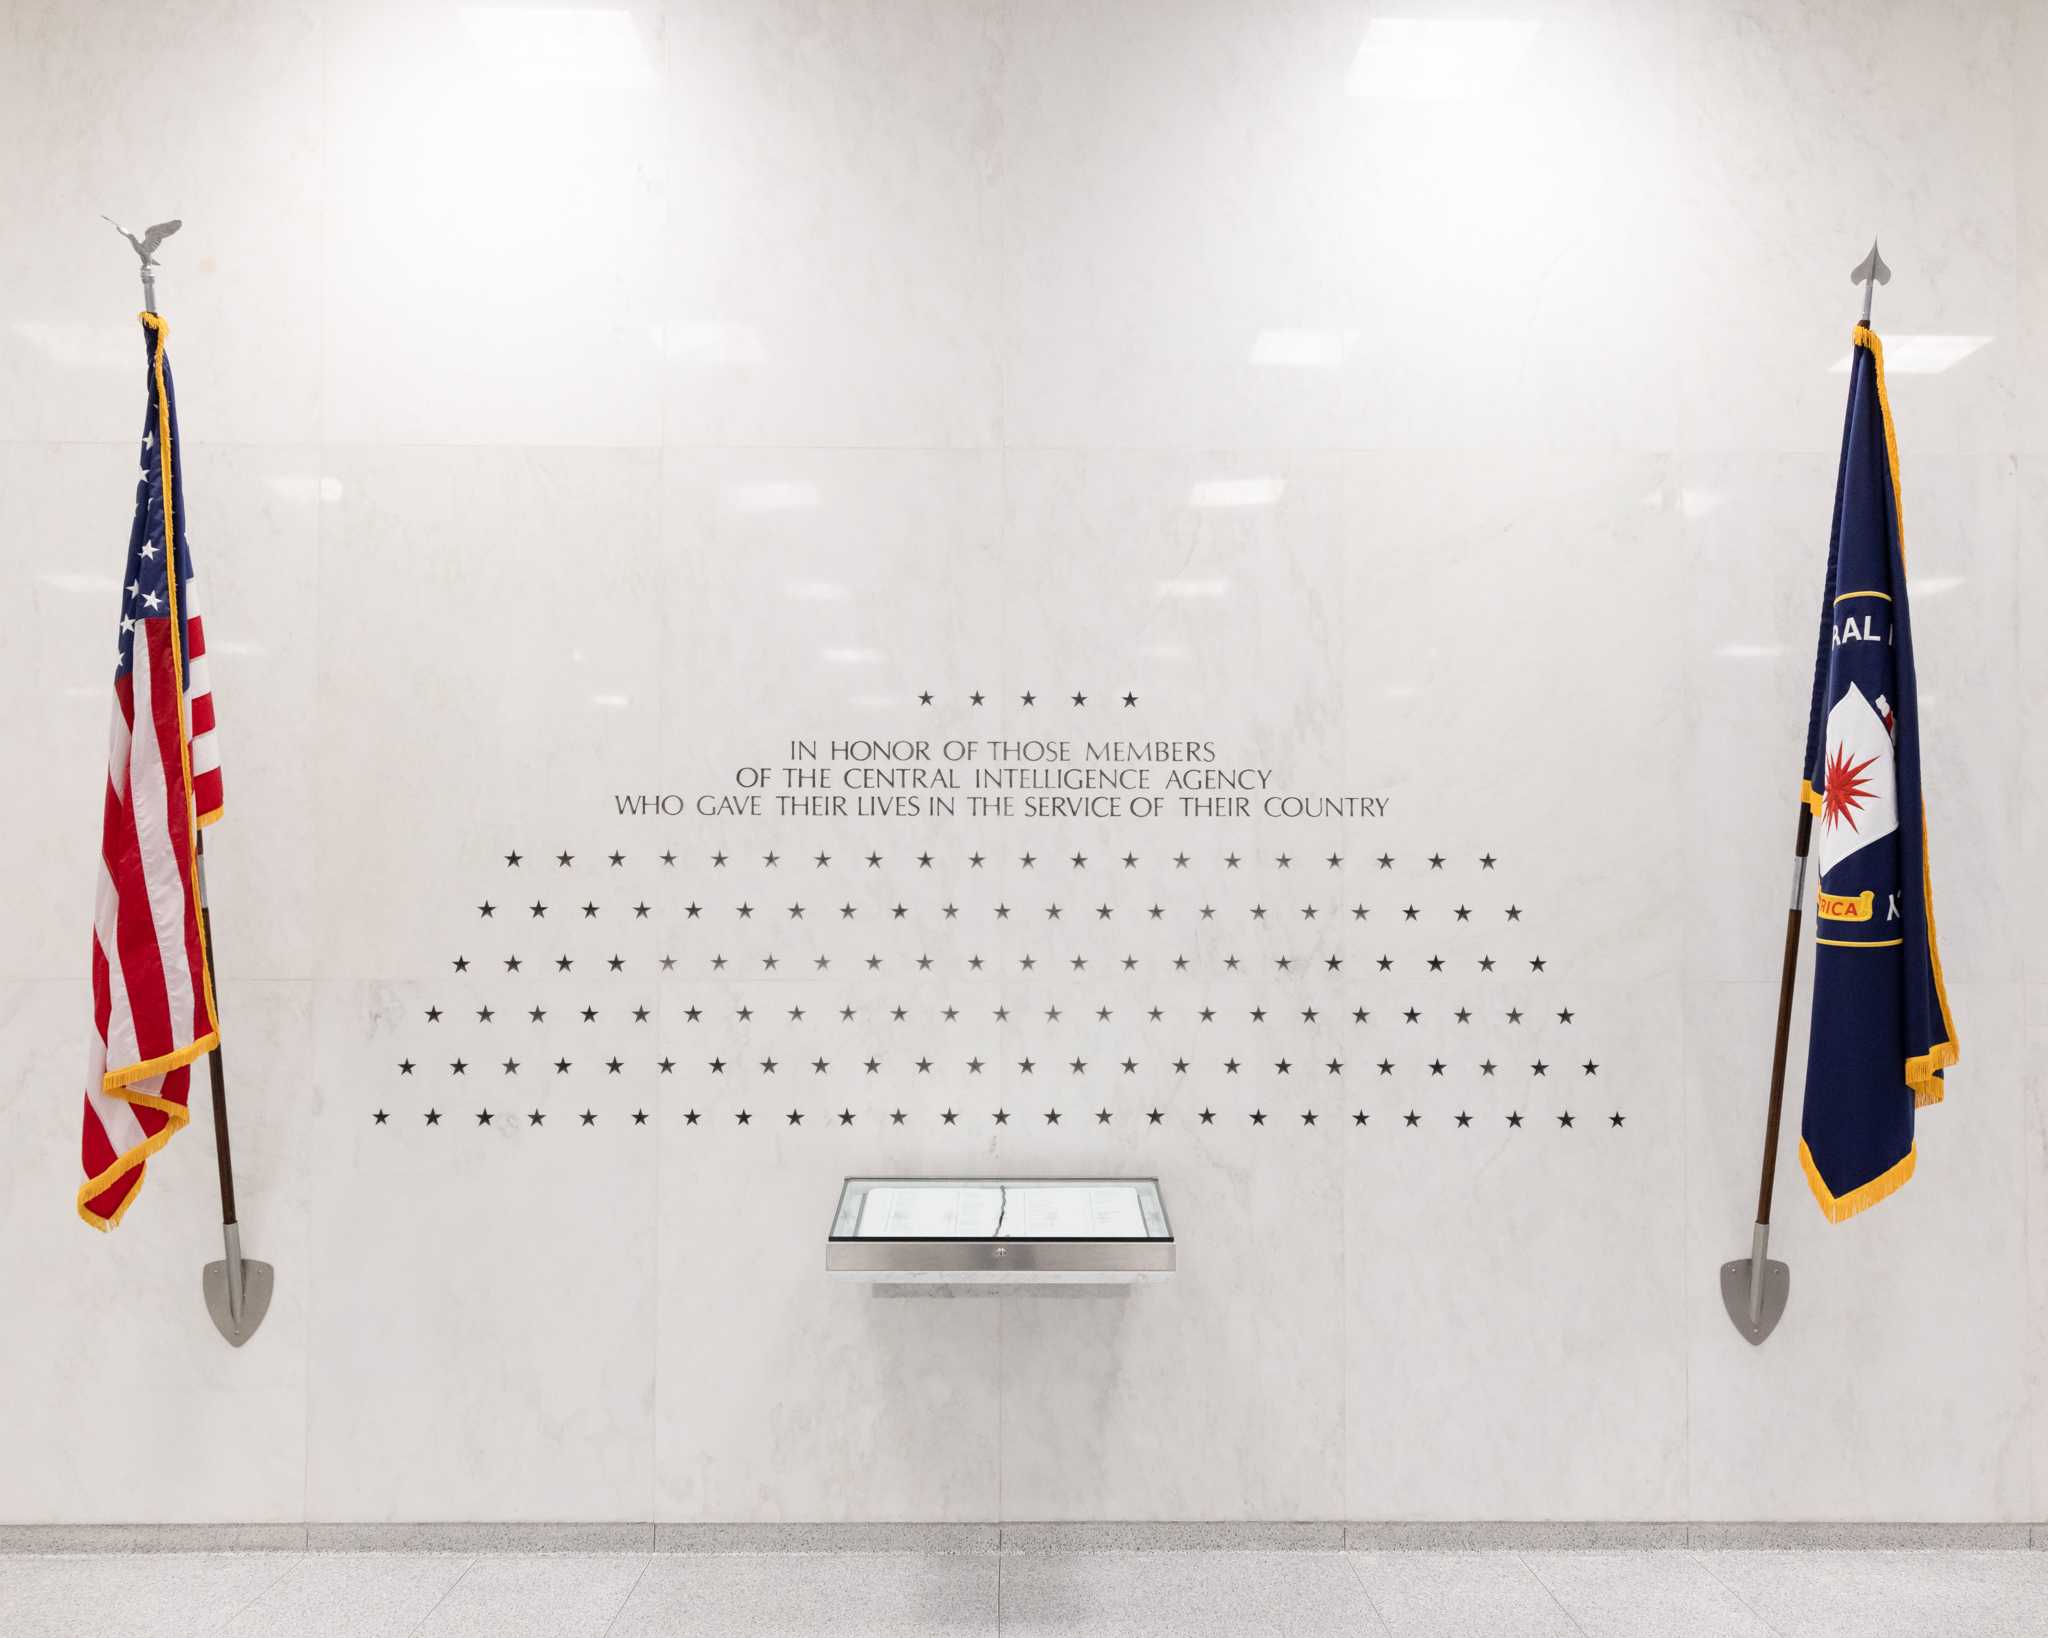 The American flag and the CIA flag on either side of an inscription with 140 stars engraved.